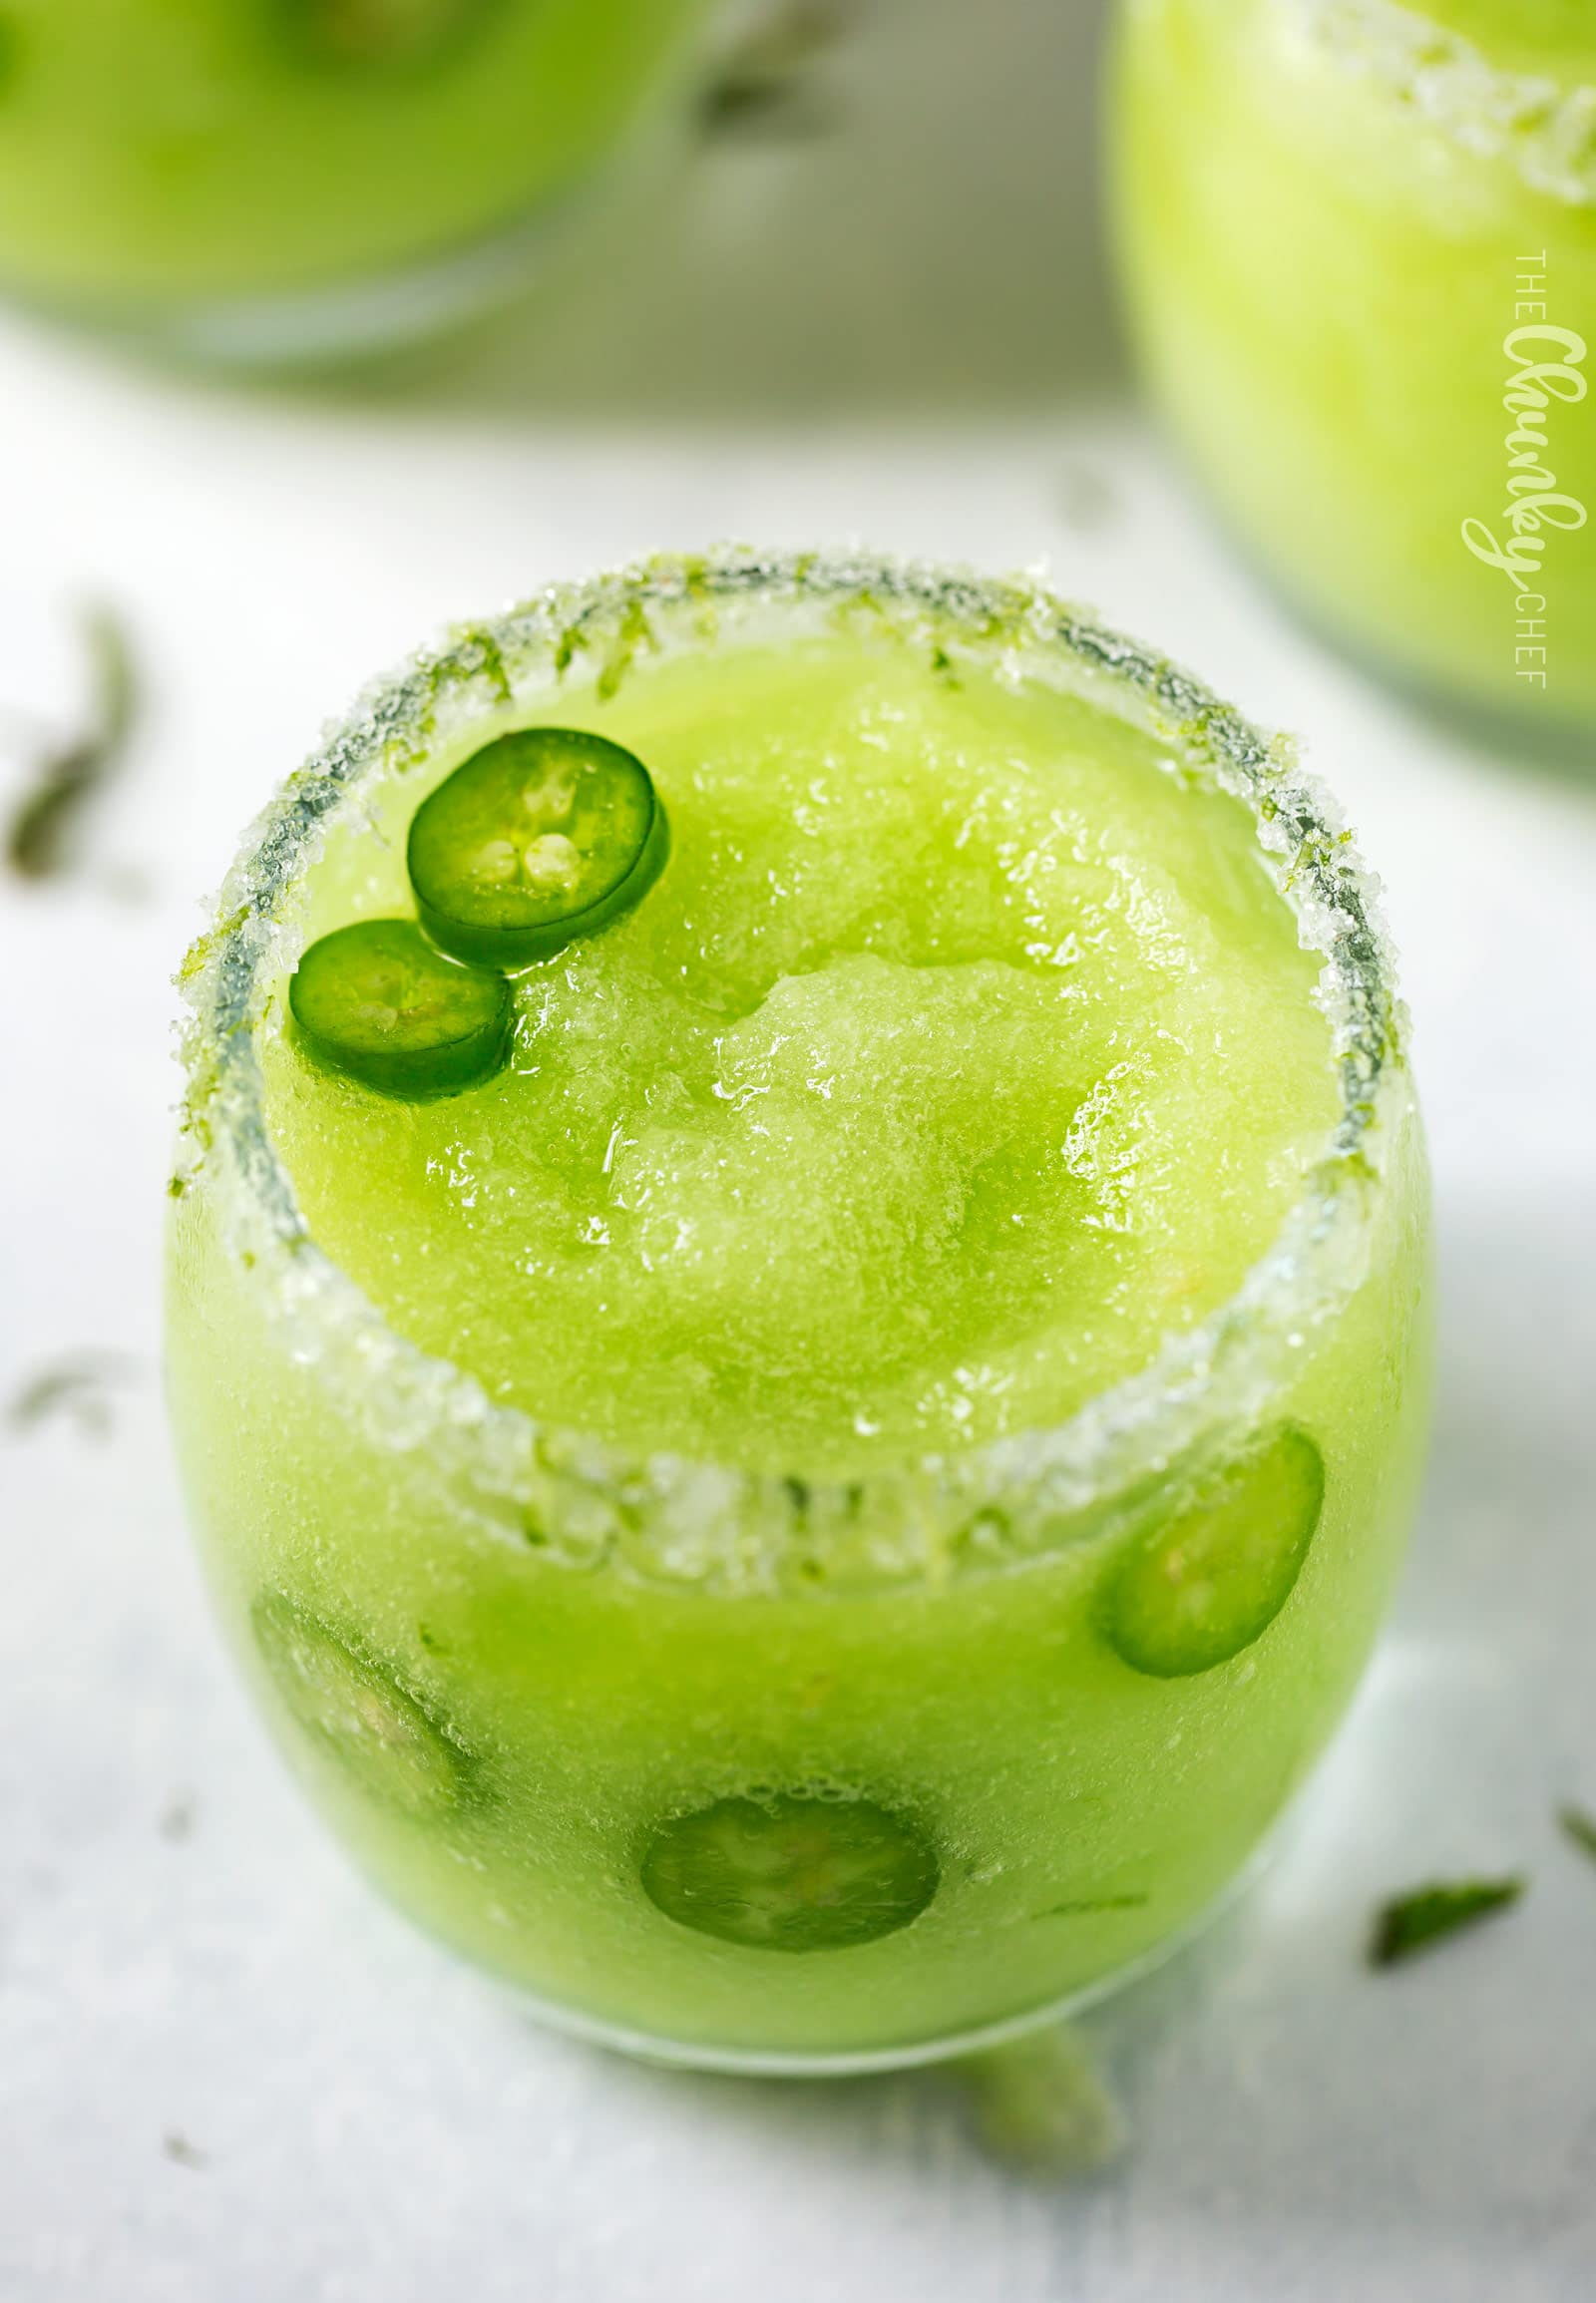 Frozen Honeydew Jalapeno Margarita | Jalapeno infused tequila is blended with fresh honeydew melon and ice to make a beautiful and refreshing summer margarita cocktail! | http://thechunkychef.com